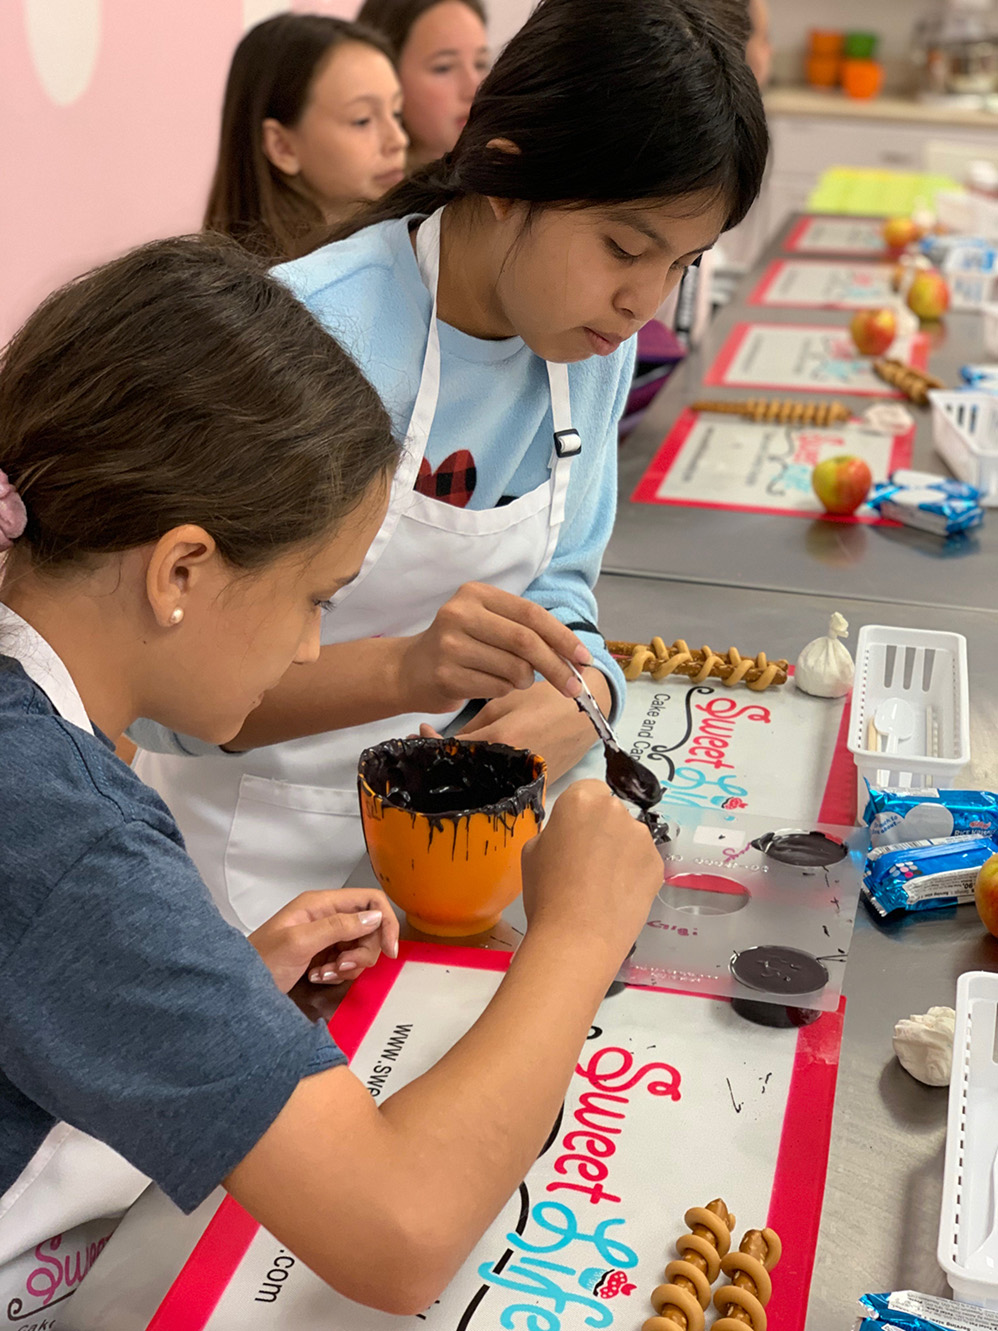 Summer camps about cake decorating in Miami